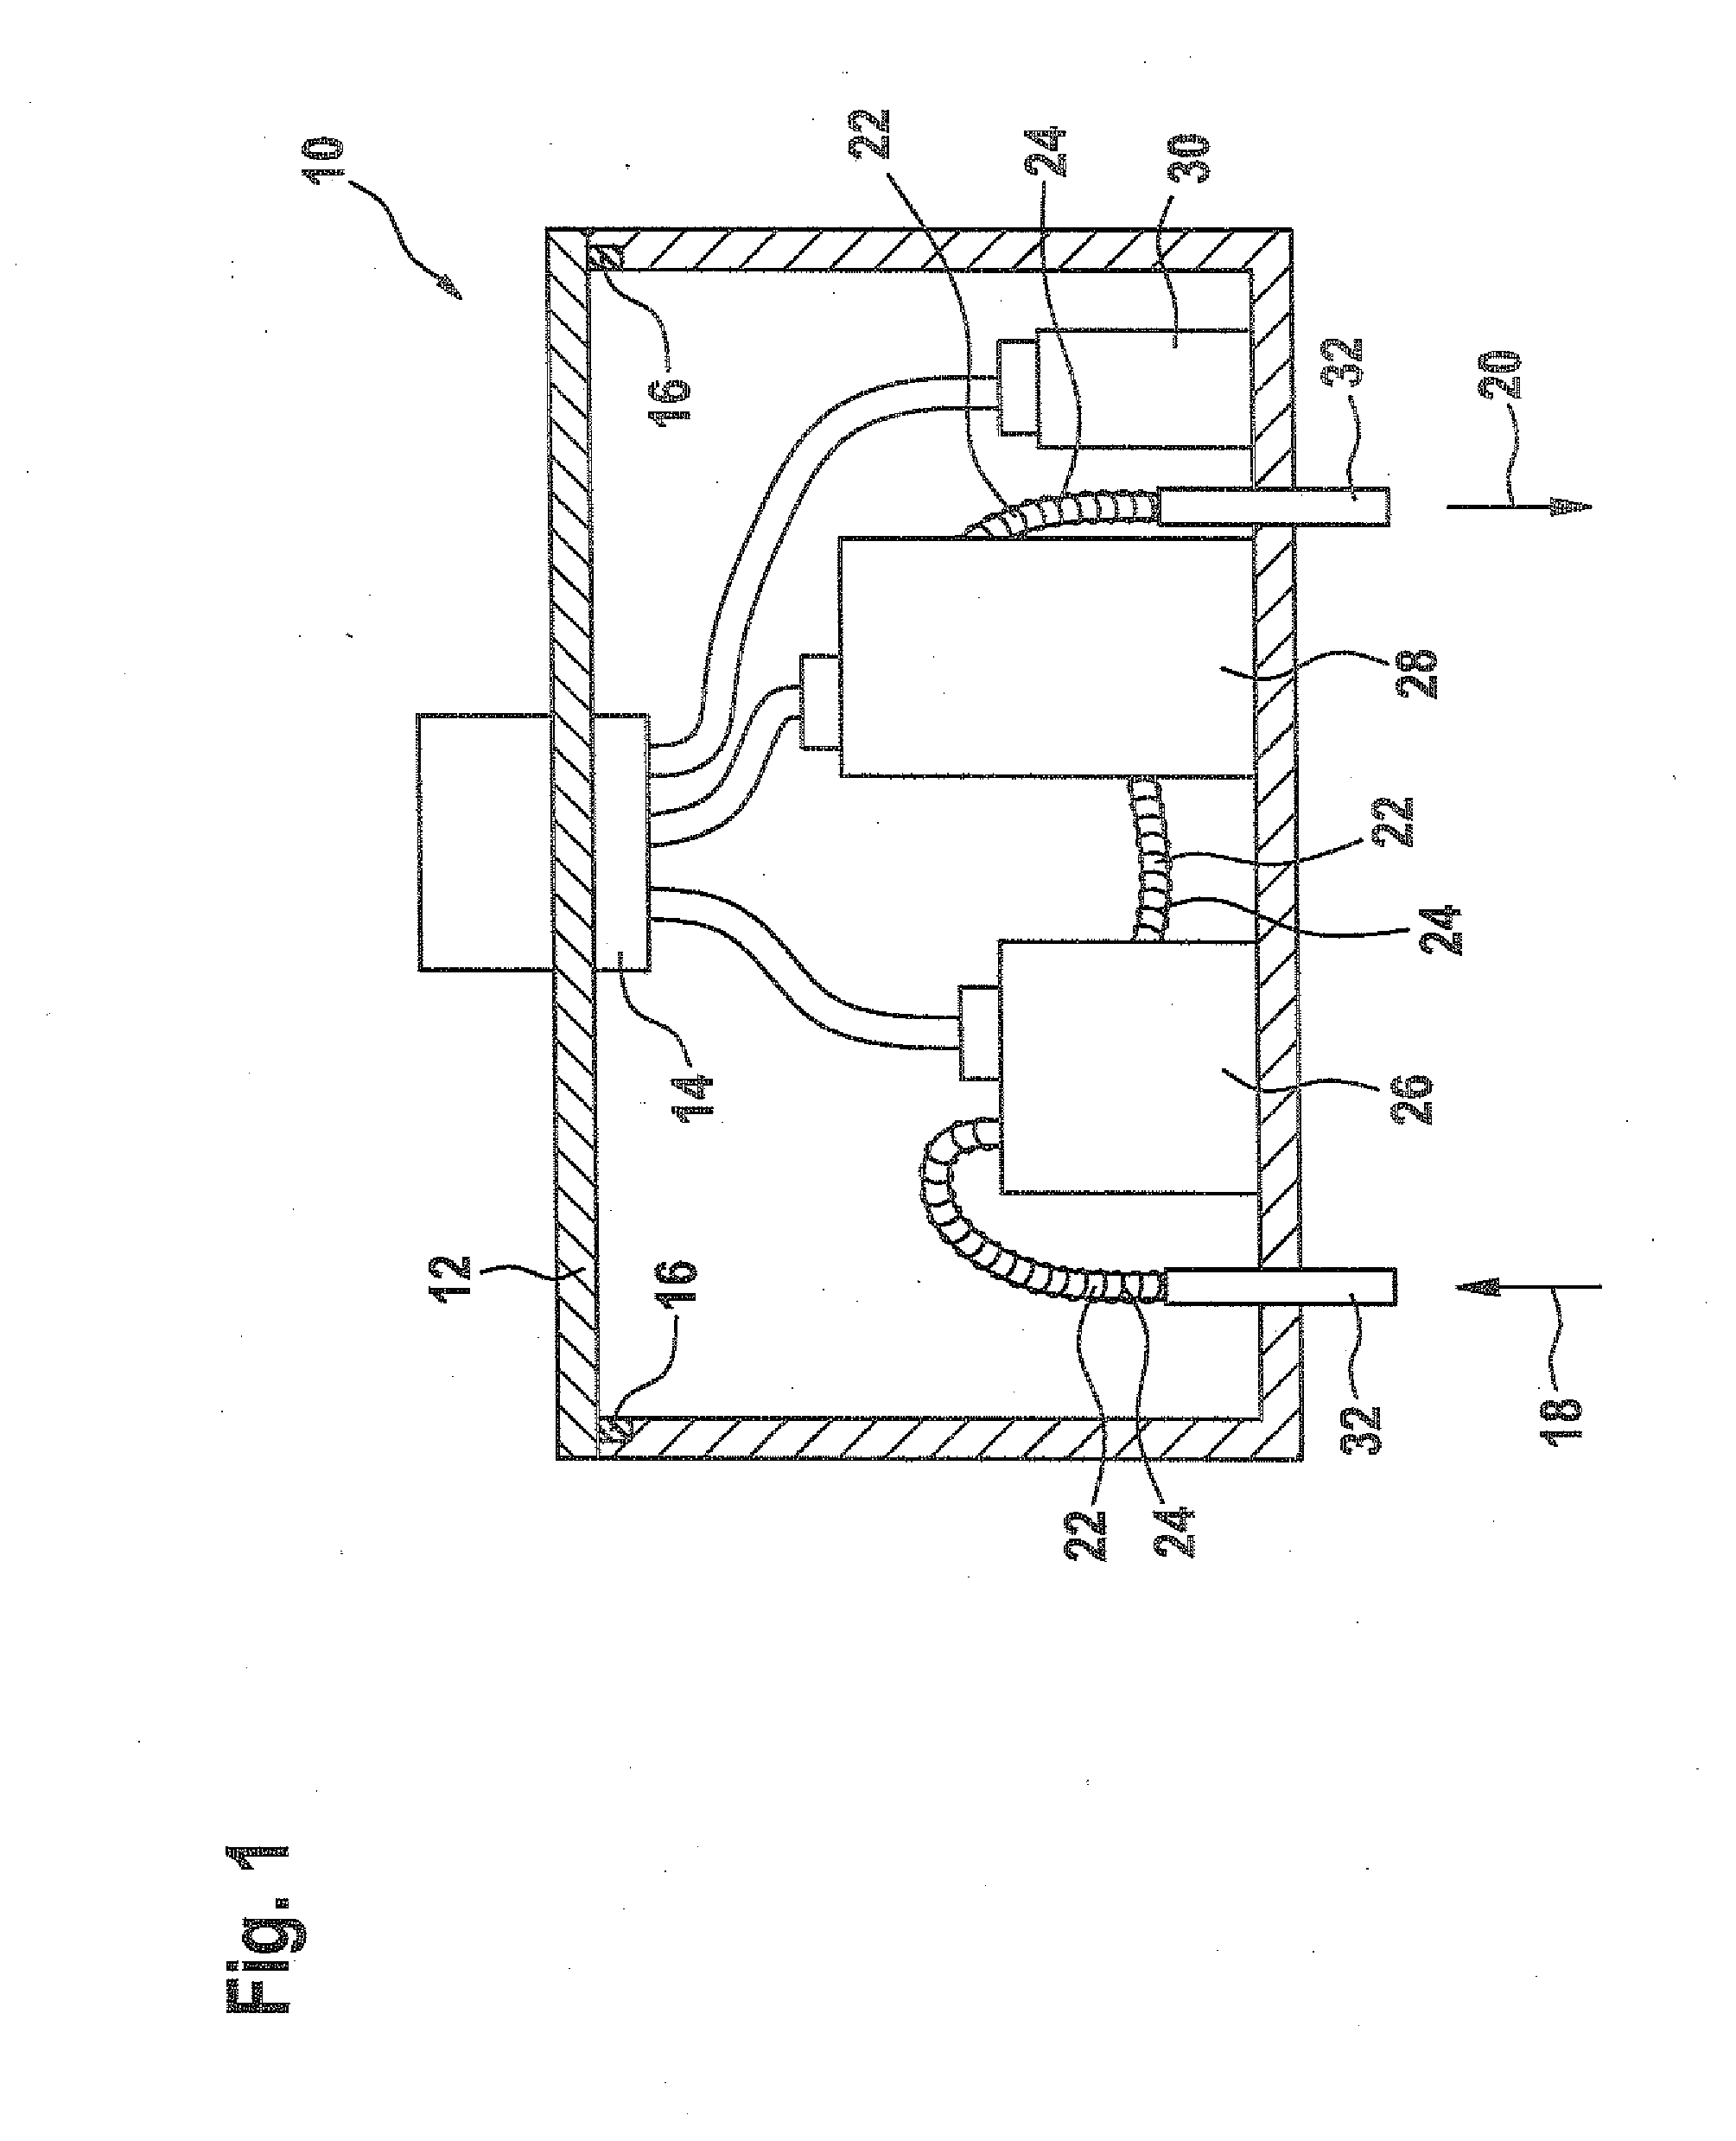 Delivery module for selective catalytic reduction